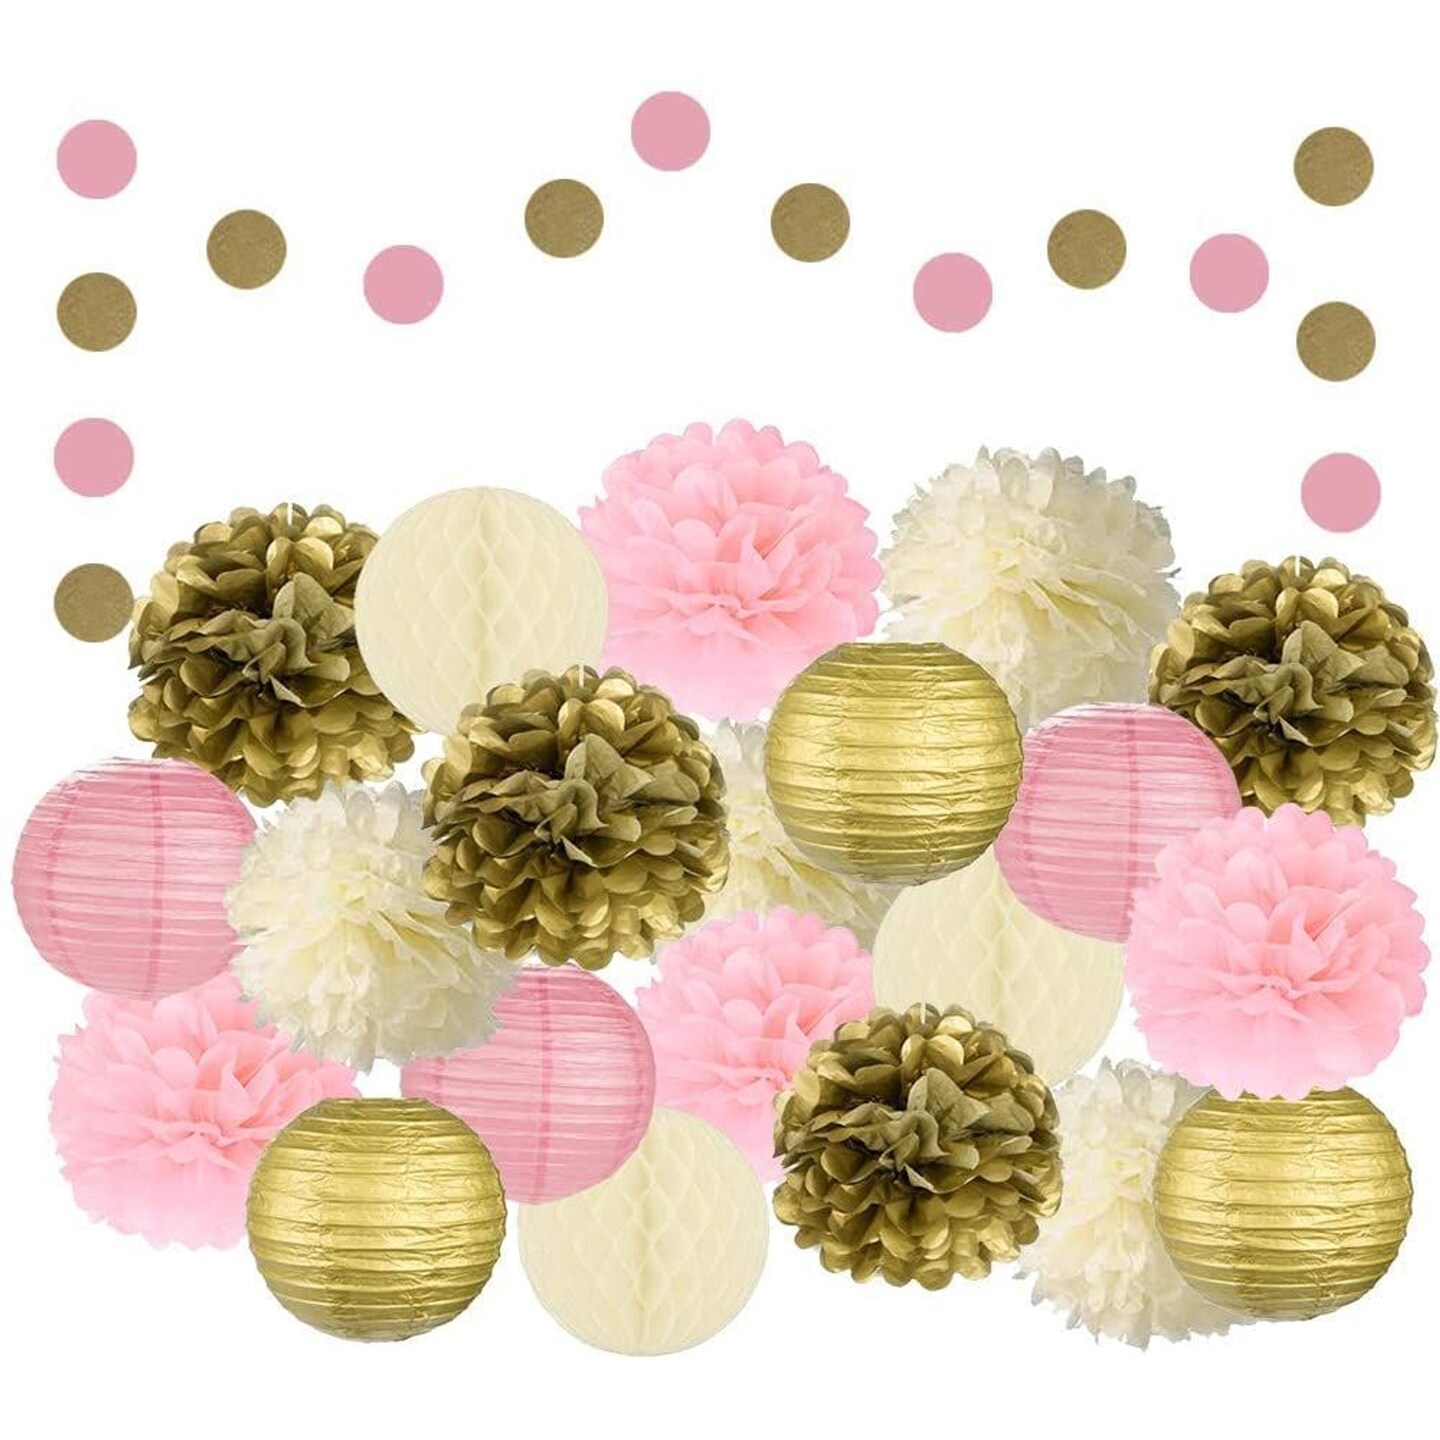 EpiqueOne 22 Pcs Mixed Pink, Gold &#x26; Ivory Party Decorations By Epique Occasions&#x2013;Set Of Hanging Tissue Paper Flower Pom Poms, Lanterns &#x26; Honeycomb Balls For Girl Birthday Wedding &#x26; Party D&#xE9;cor Supplies